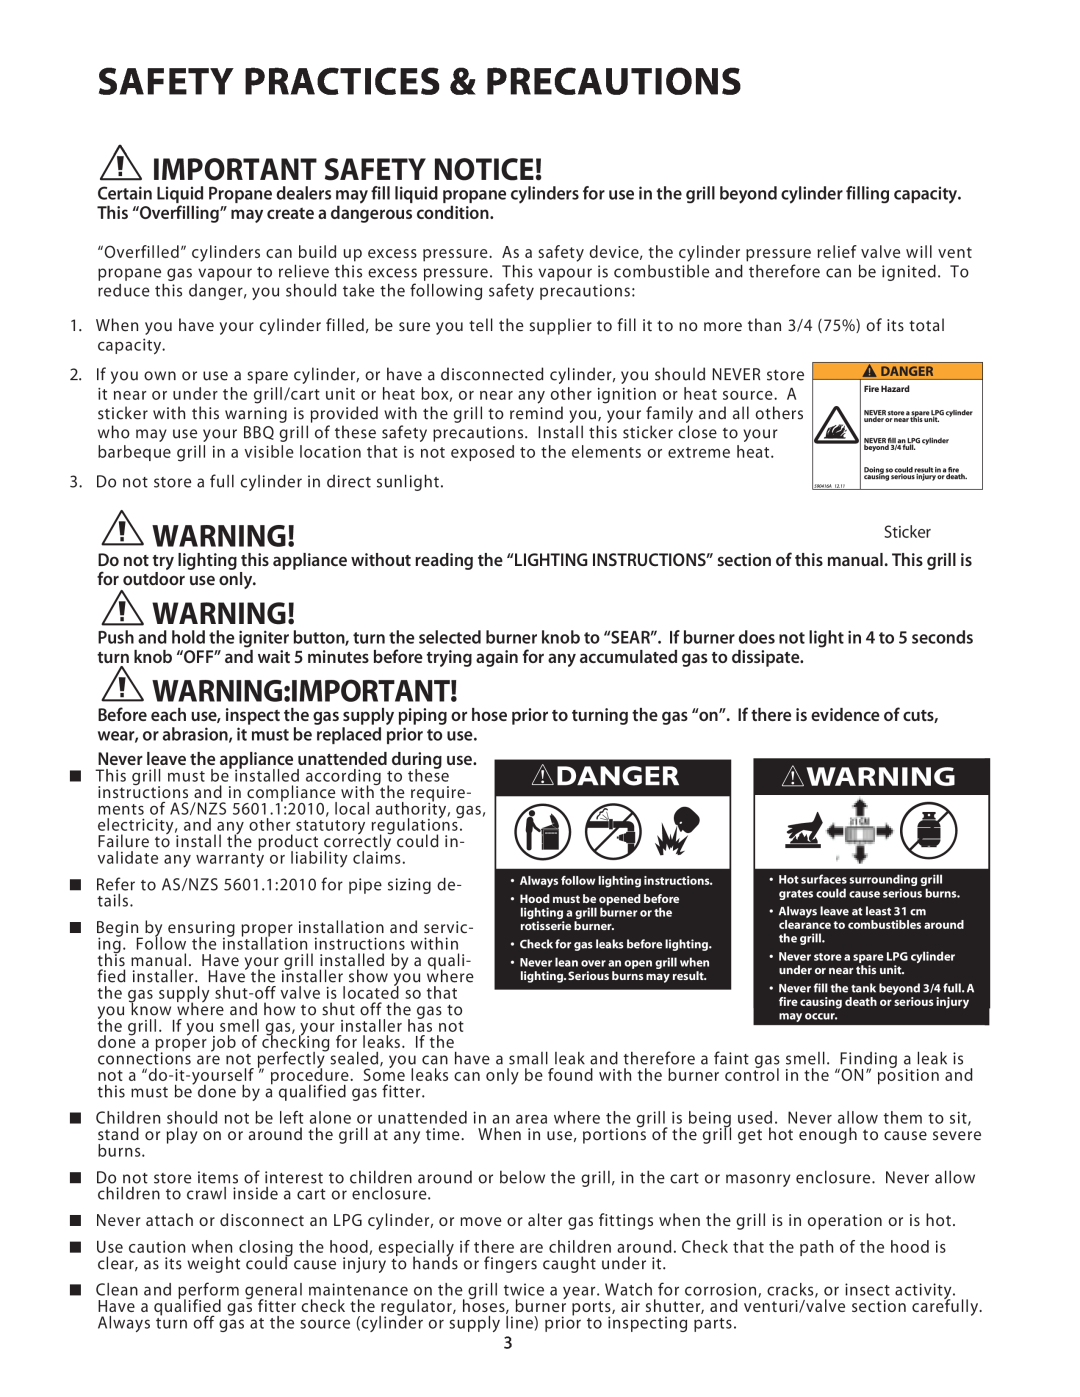 Fisher & Paykel BGB48, BGB36 Safety Practices & Precautions, Important Safety Notice, Warningimportant 